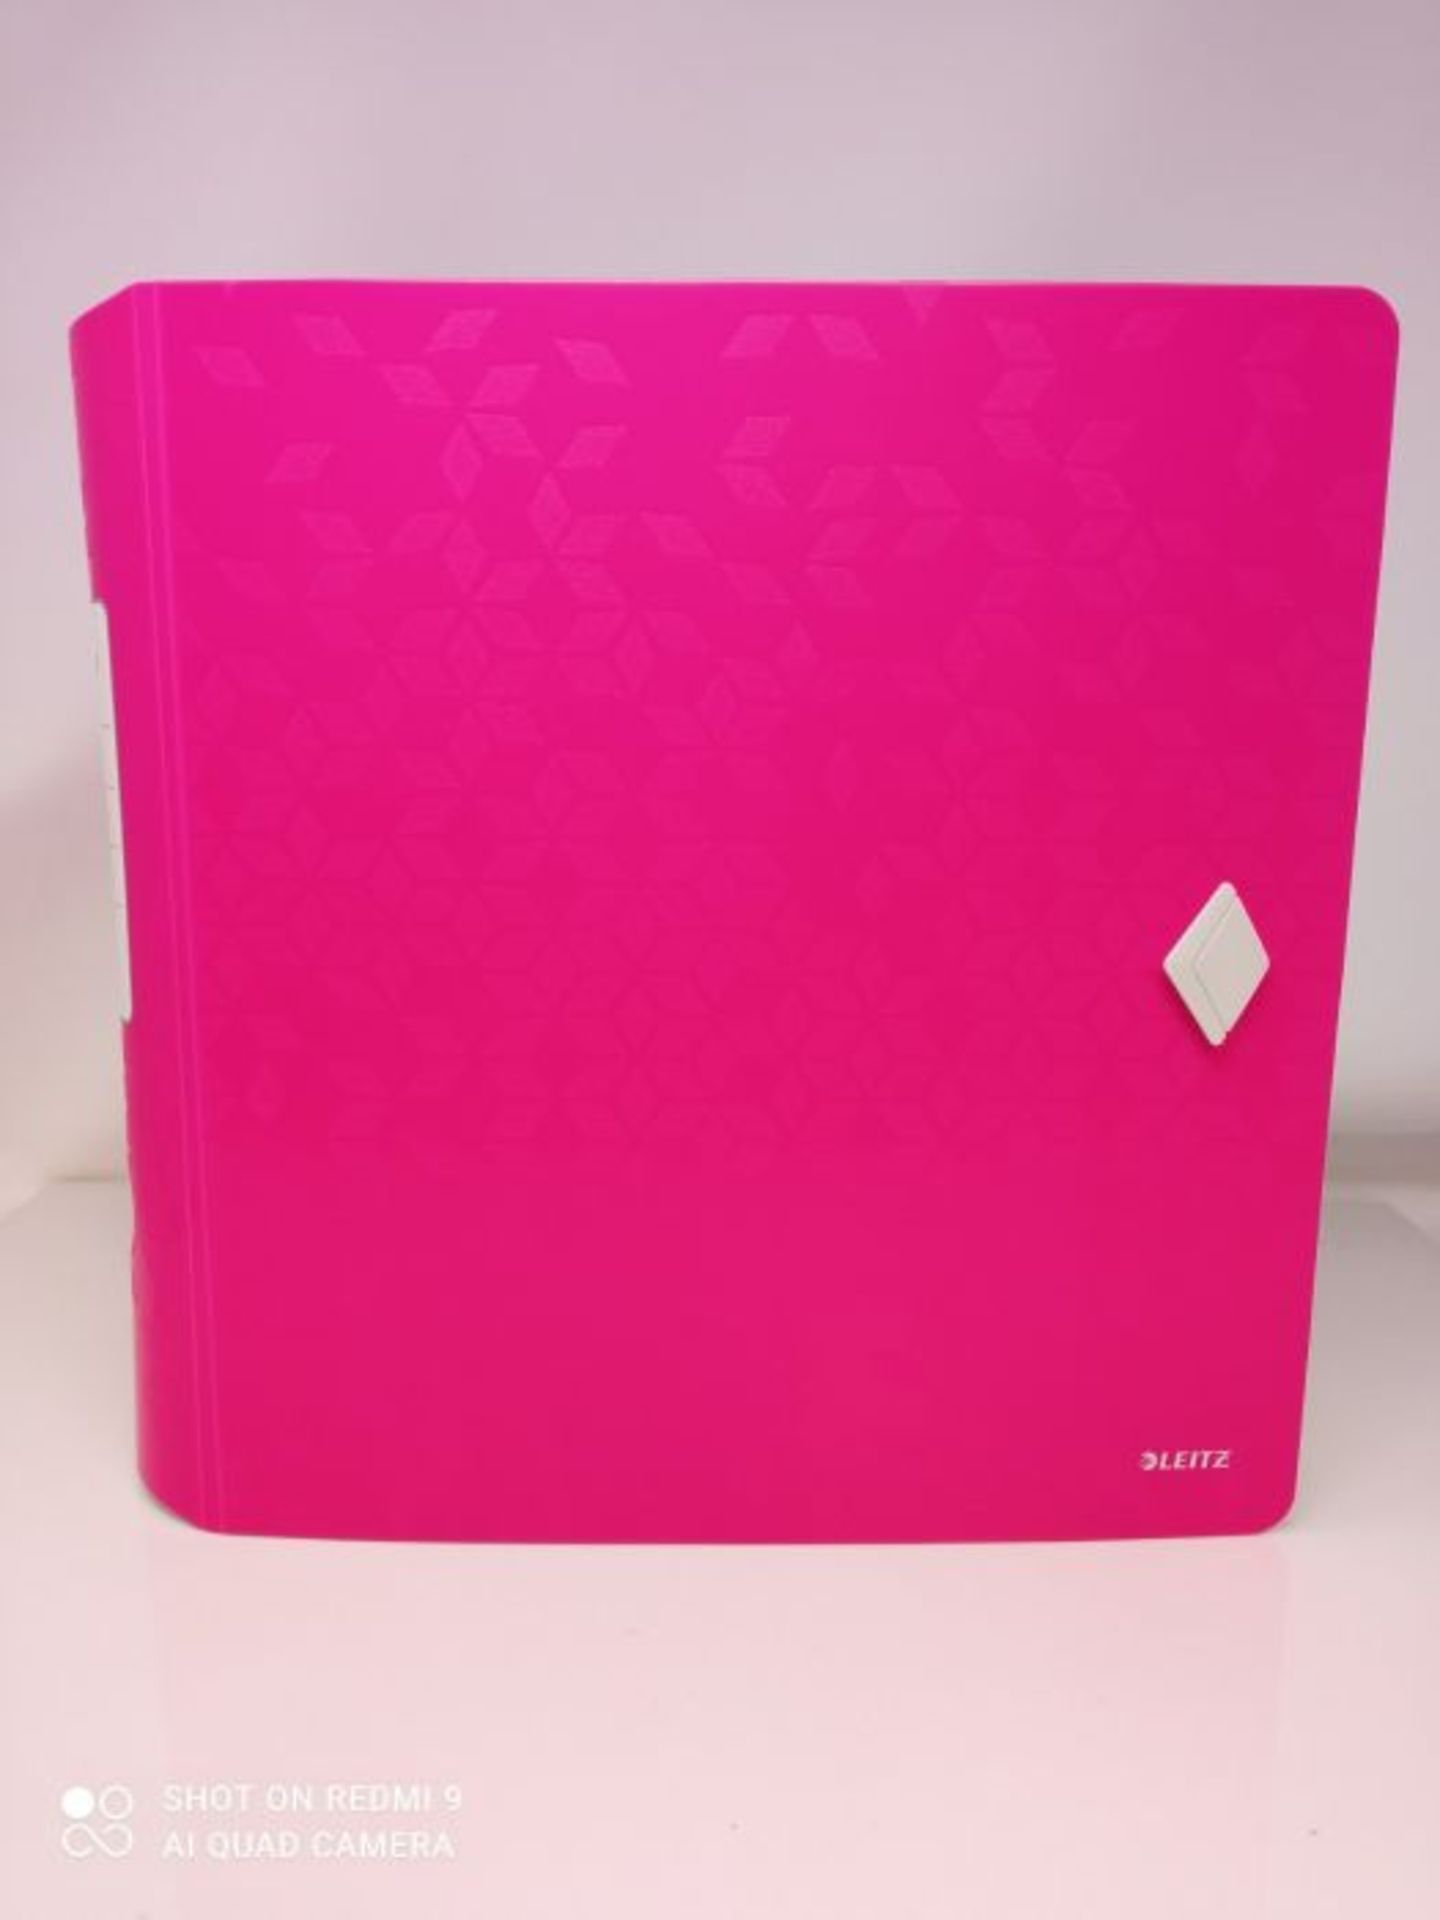 Leitz Lever Arch File, Metallic pink, A4, Curved spine 75mm width, Elastic fastening, - Image 2 of 3